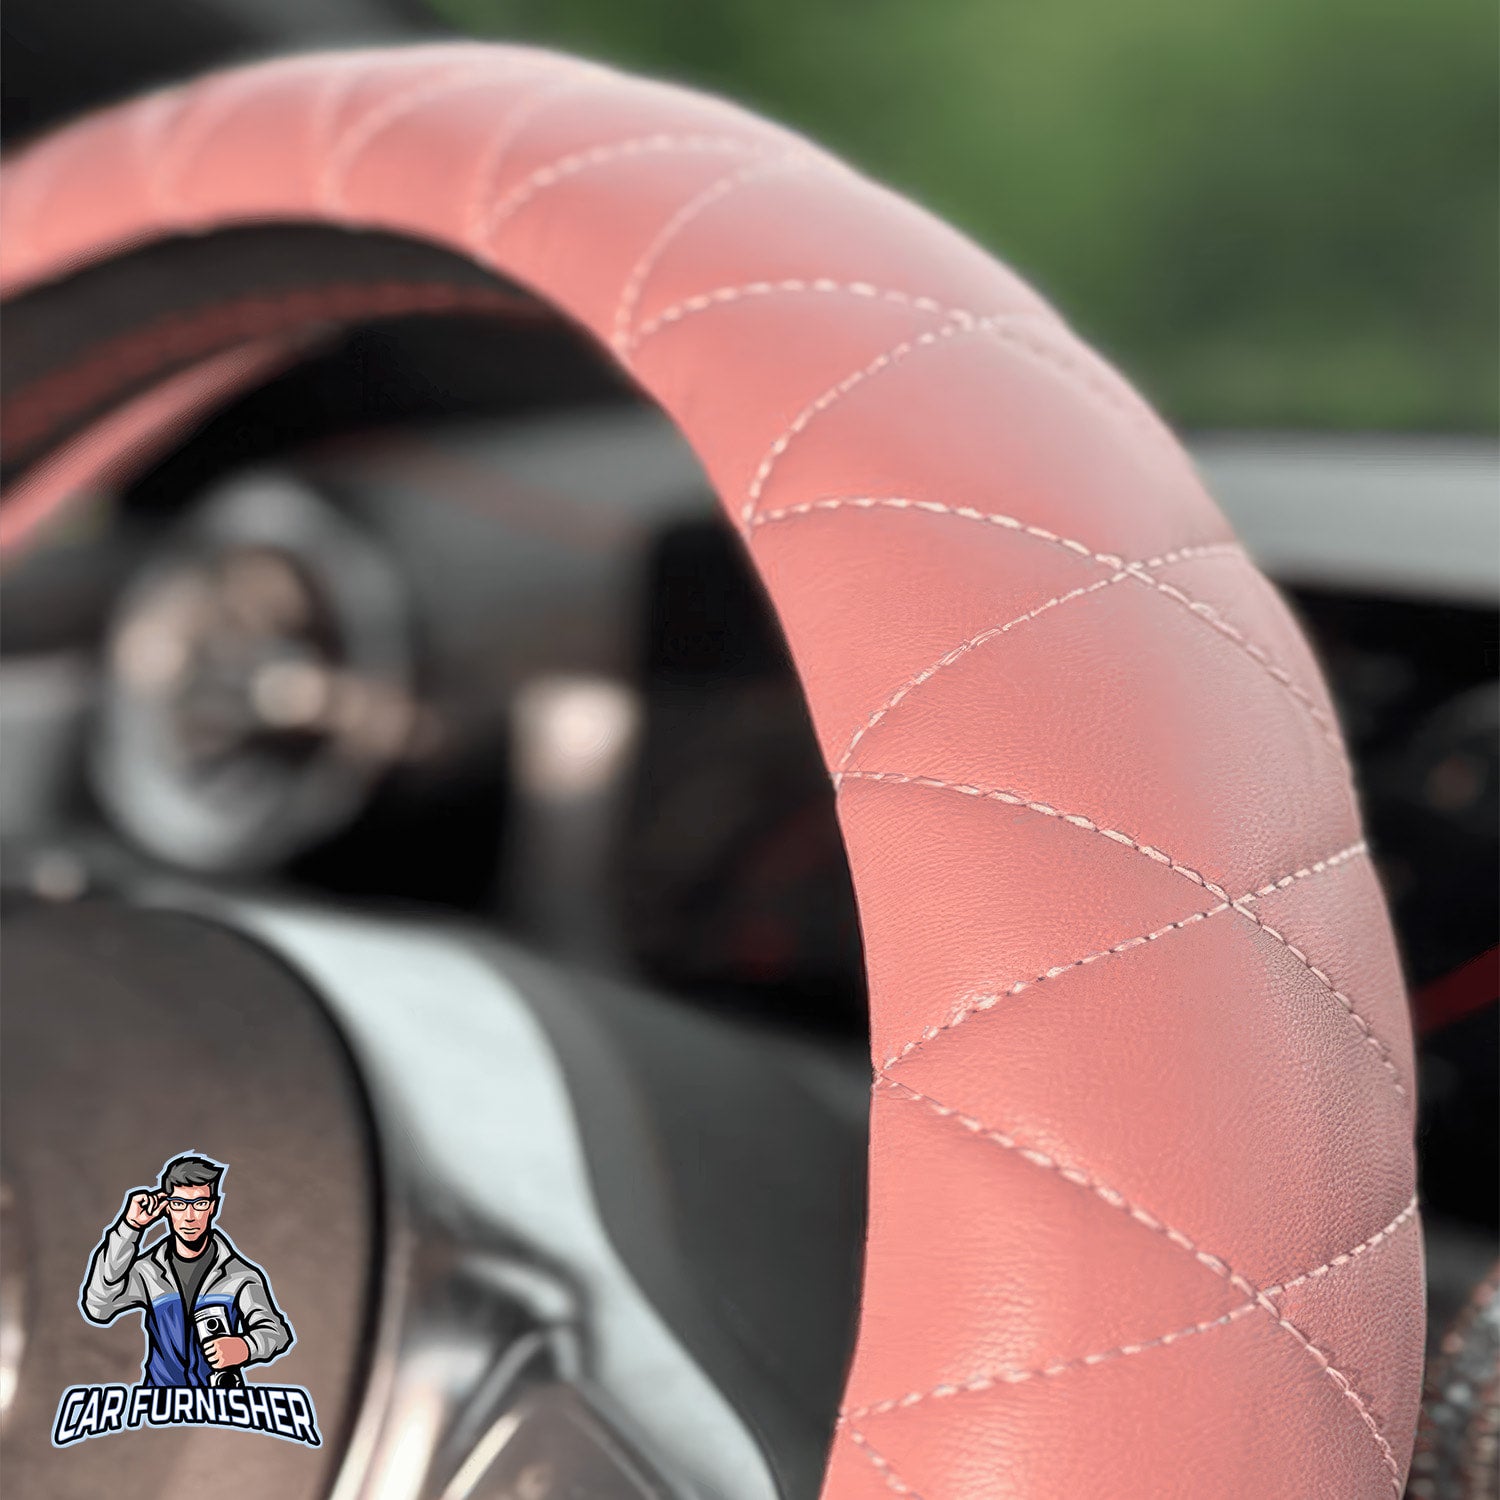 Steering Wheel Cover - Quilted Leather Pink Leather